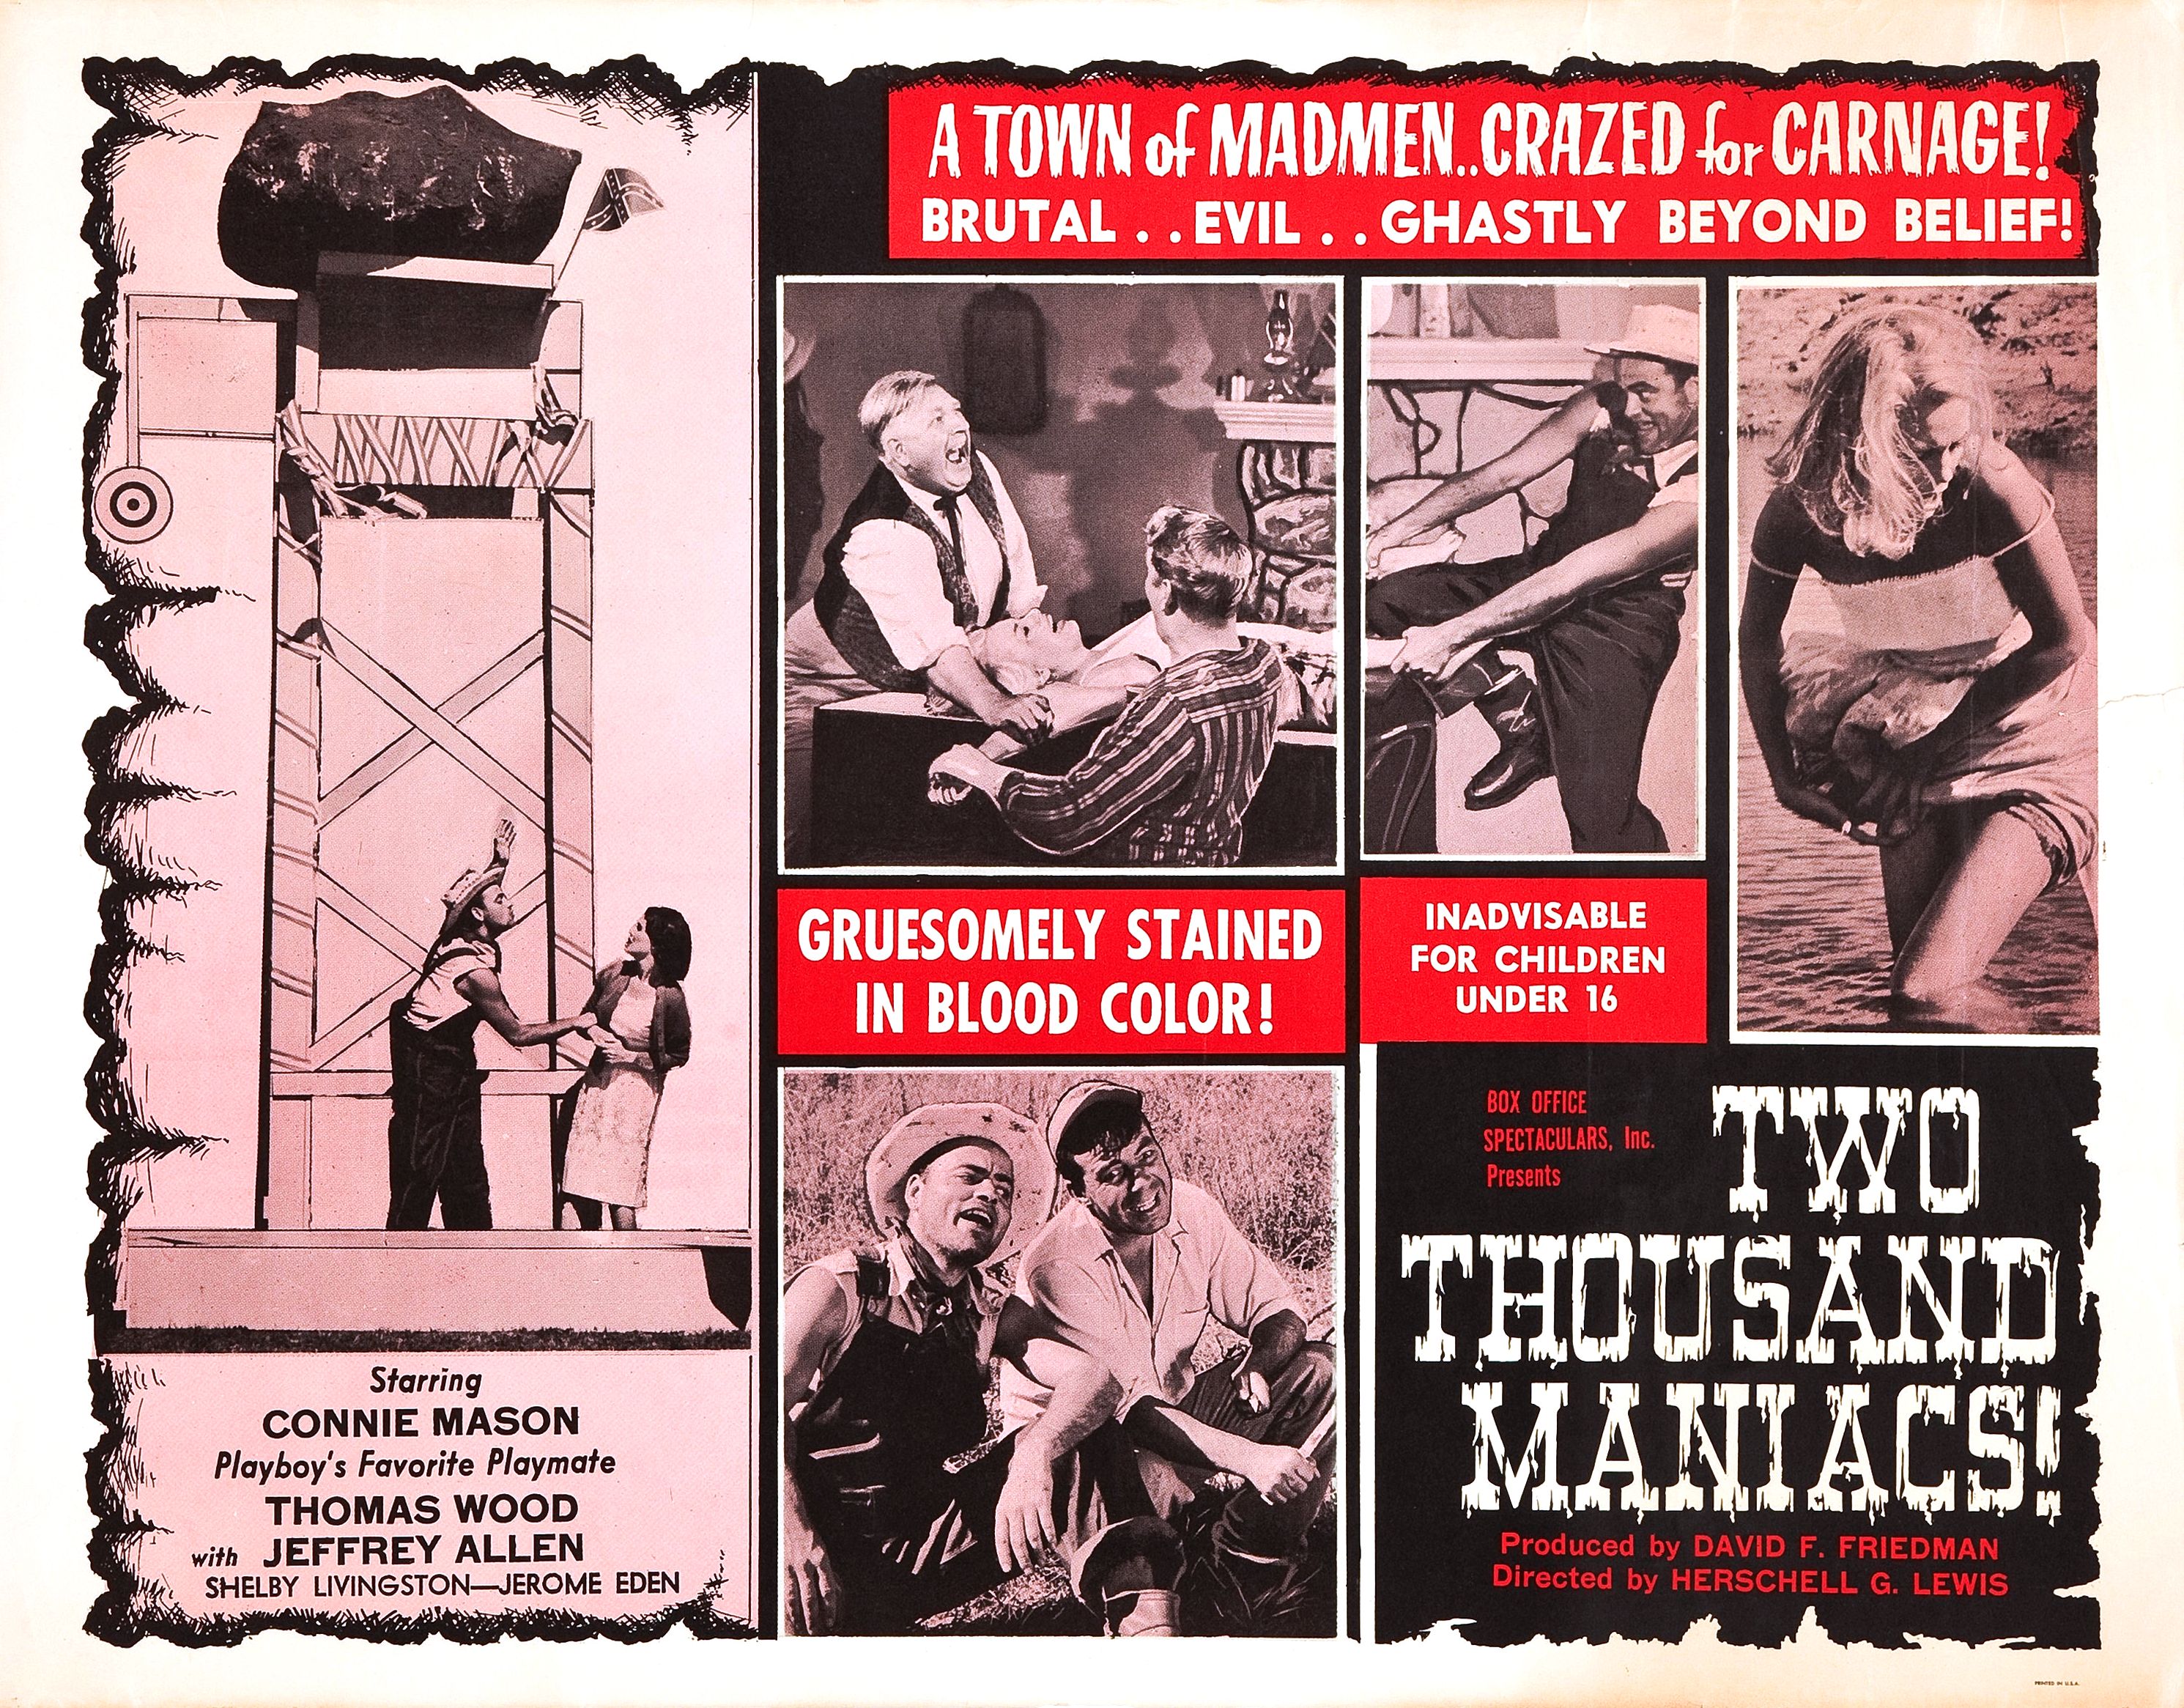 two thousand maniacs 1964 - A Town Of Madmen.Crazed for Carnagel Brutal.. Evil.. Ghastly Beyond Belief! Gruesomely Stained In Blood Color! Inadvisable For Children Under 16 Xul Pictaelali I Prats E Two Thousand Maniacs! Starring Connie Mason Playboy's Fav